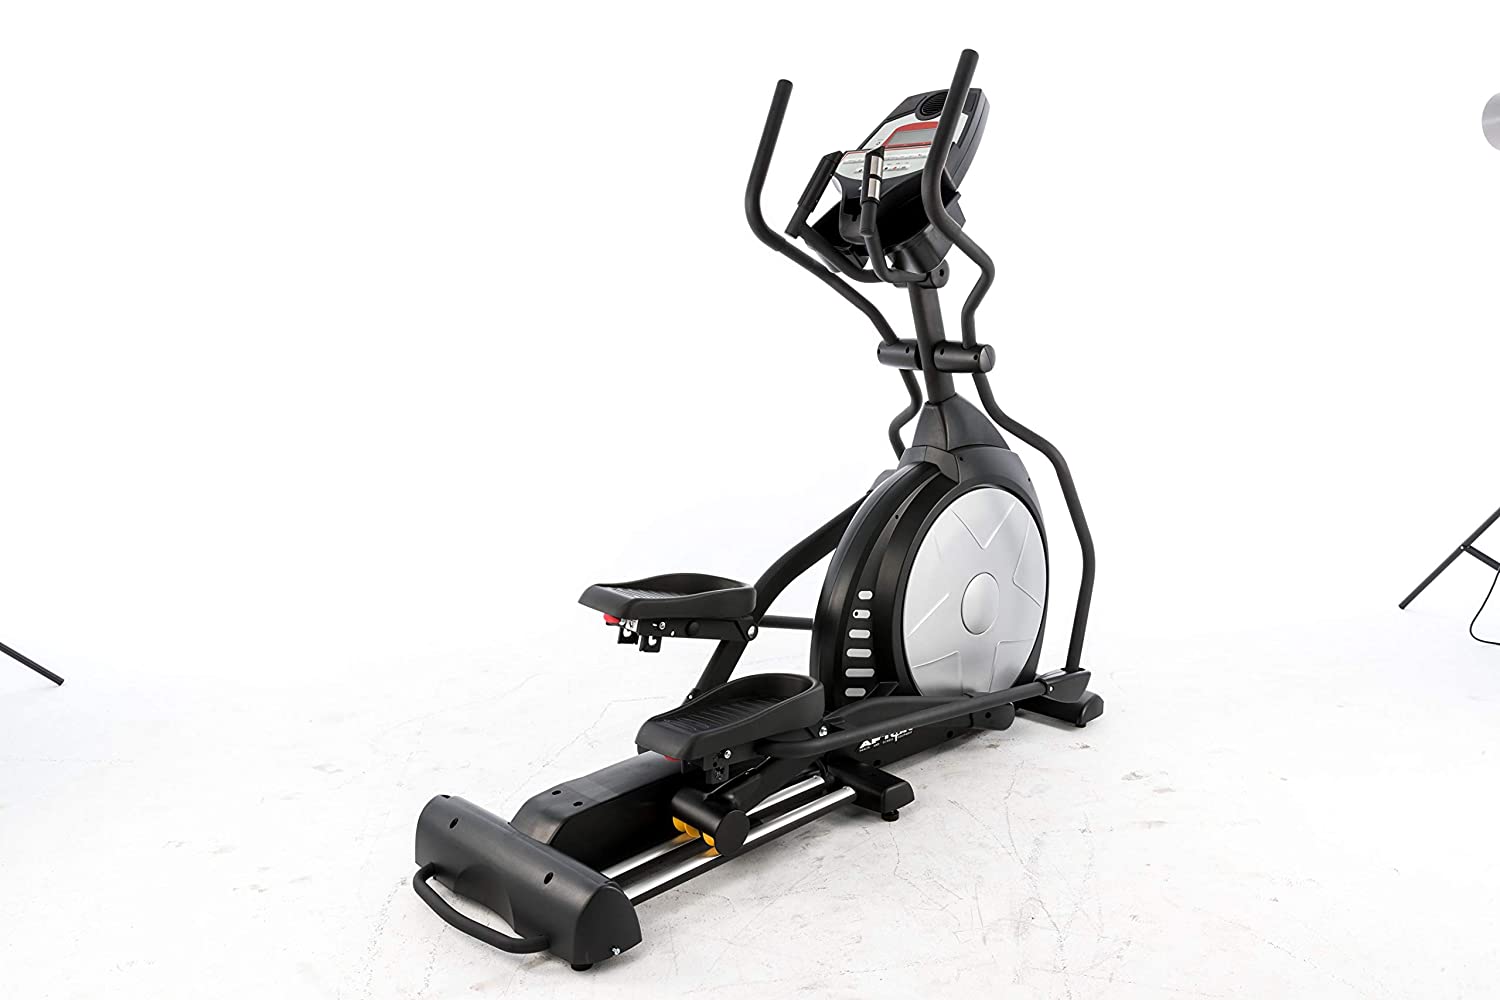 Afton FX-400 Steel Cardio Review